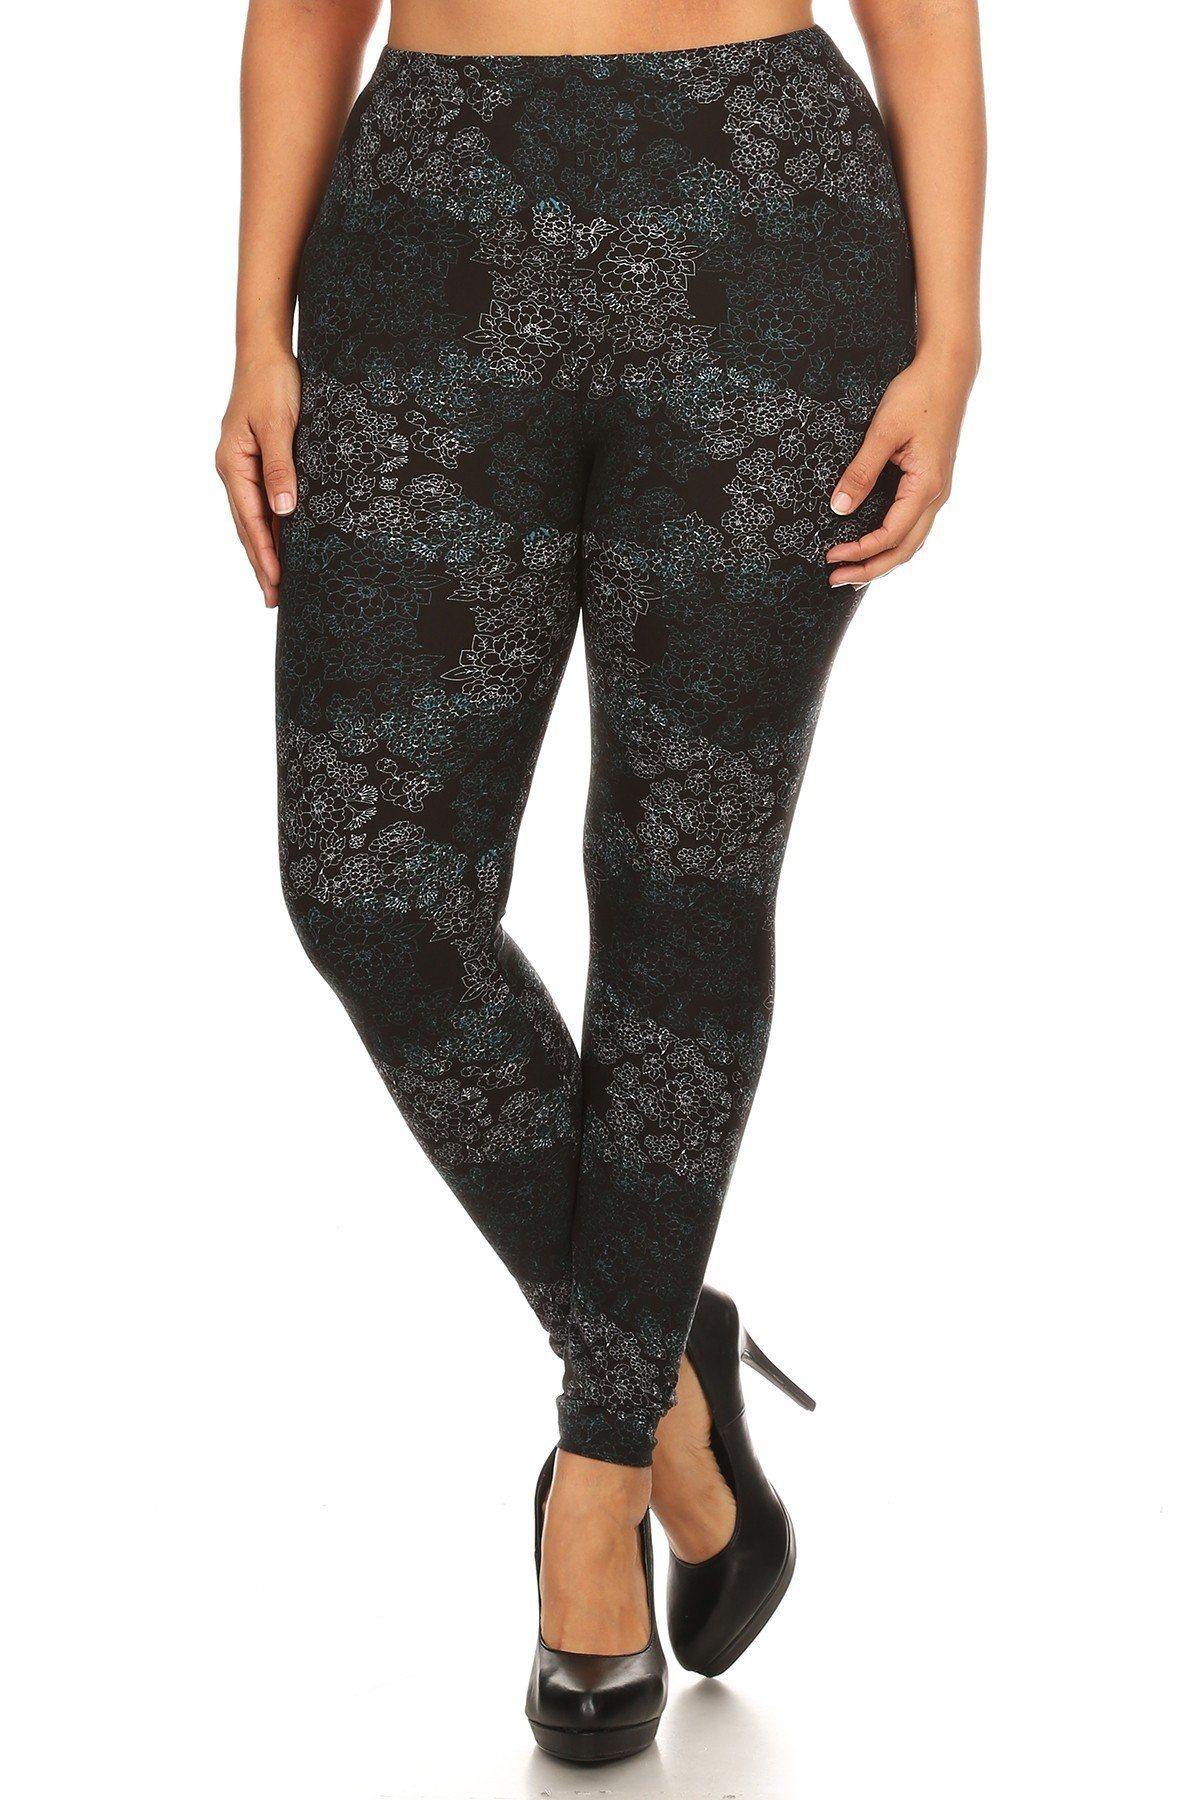 Plus Size Floral Medallion Pattern Printed Knit Legging With Elastic Waistband. - Pearlara